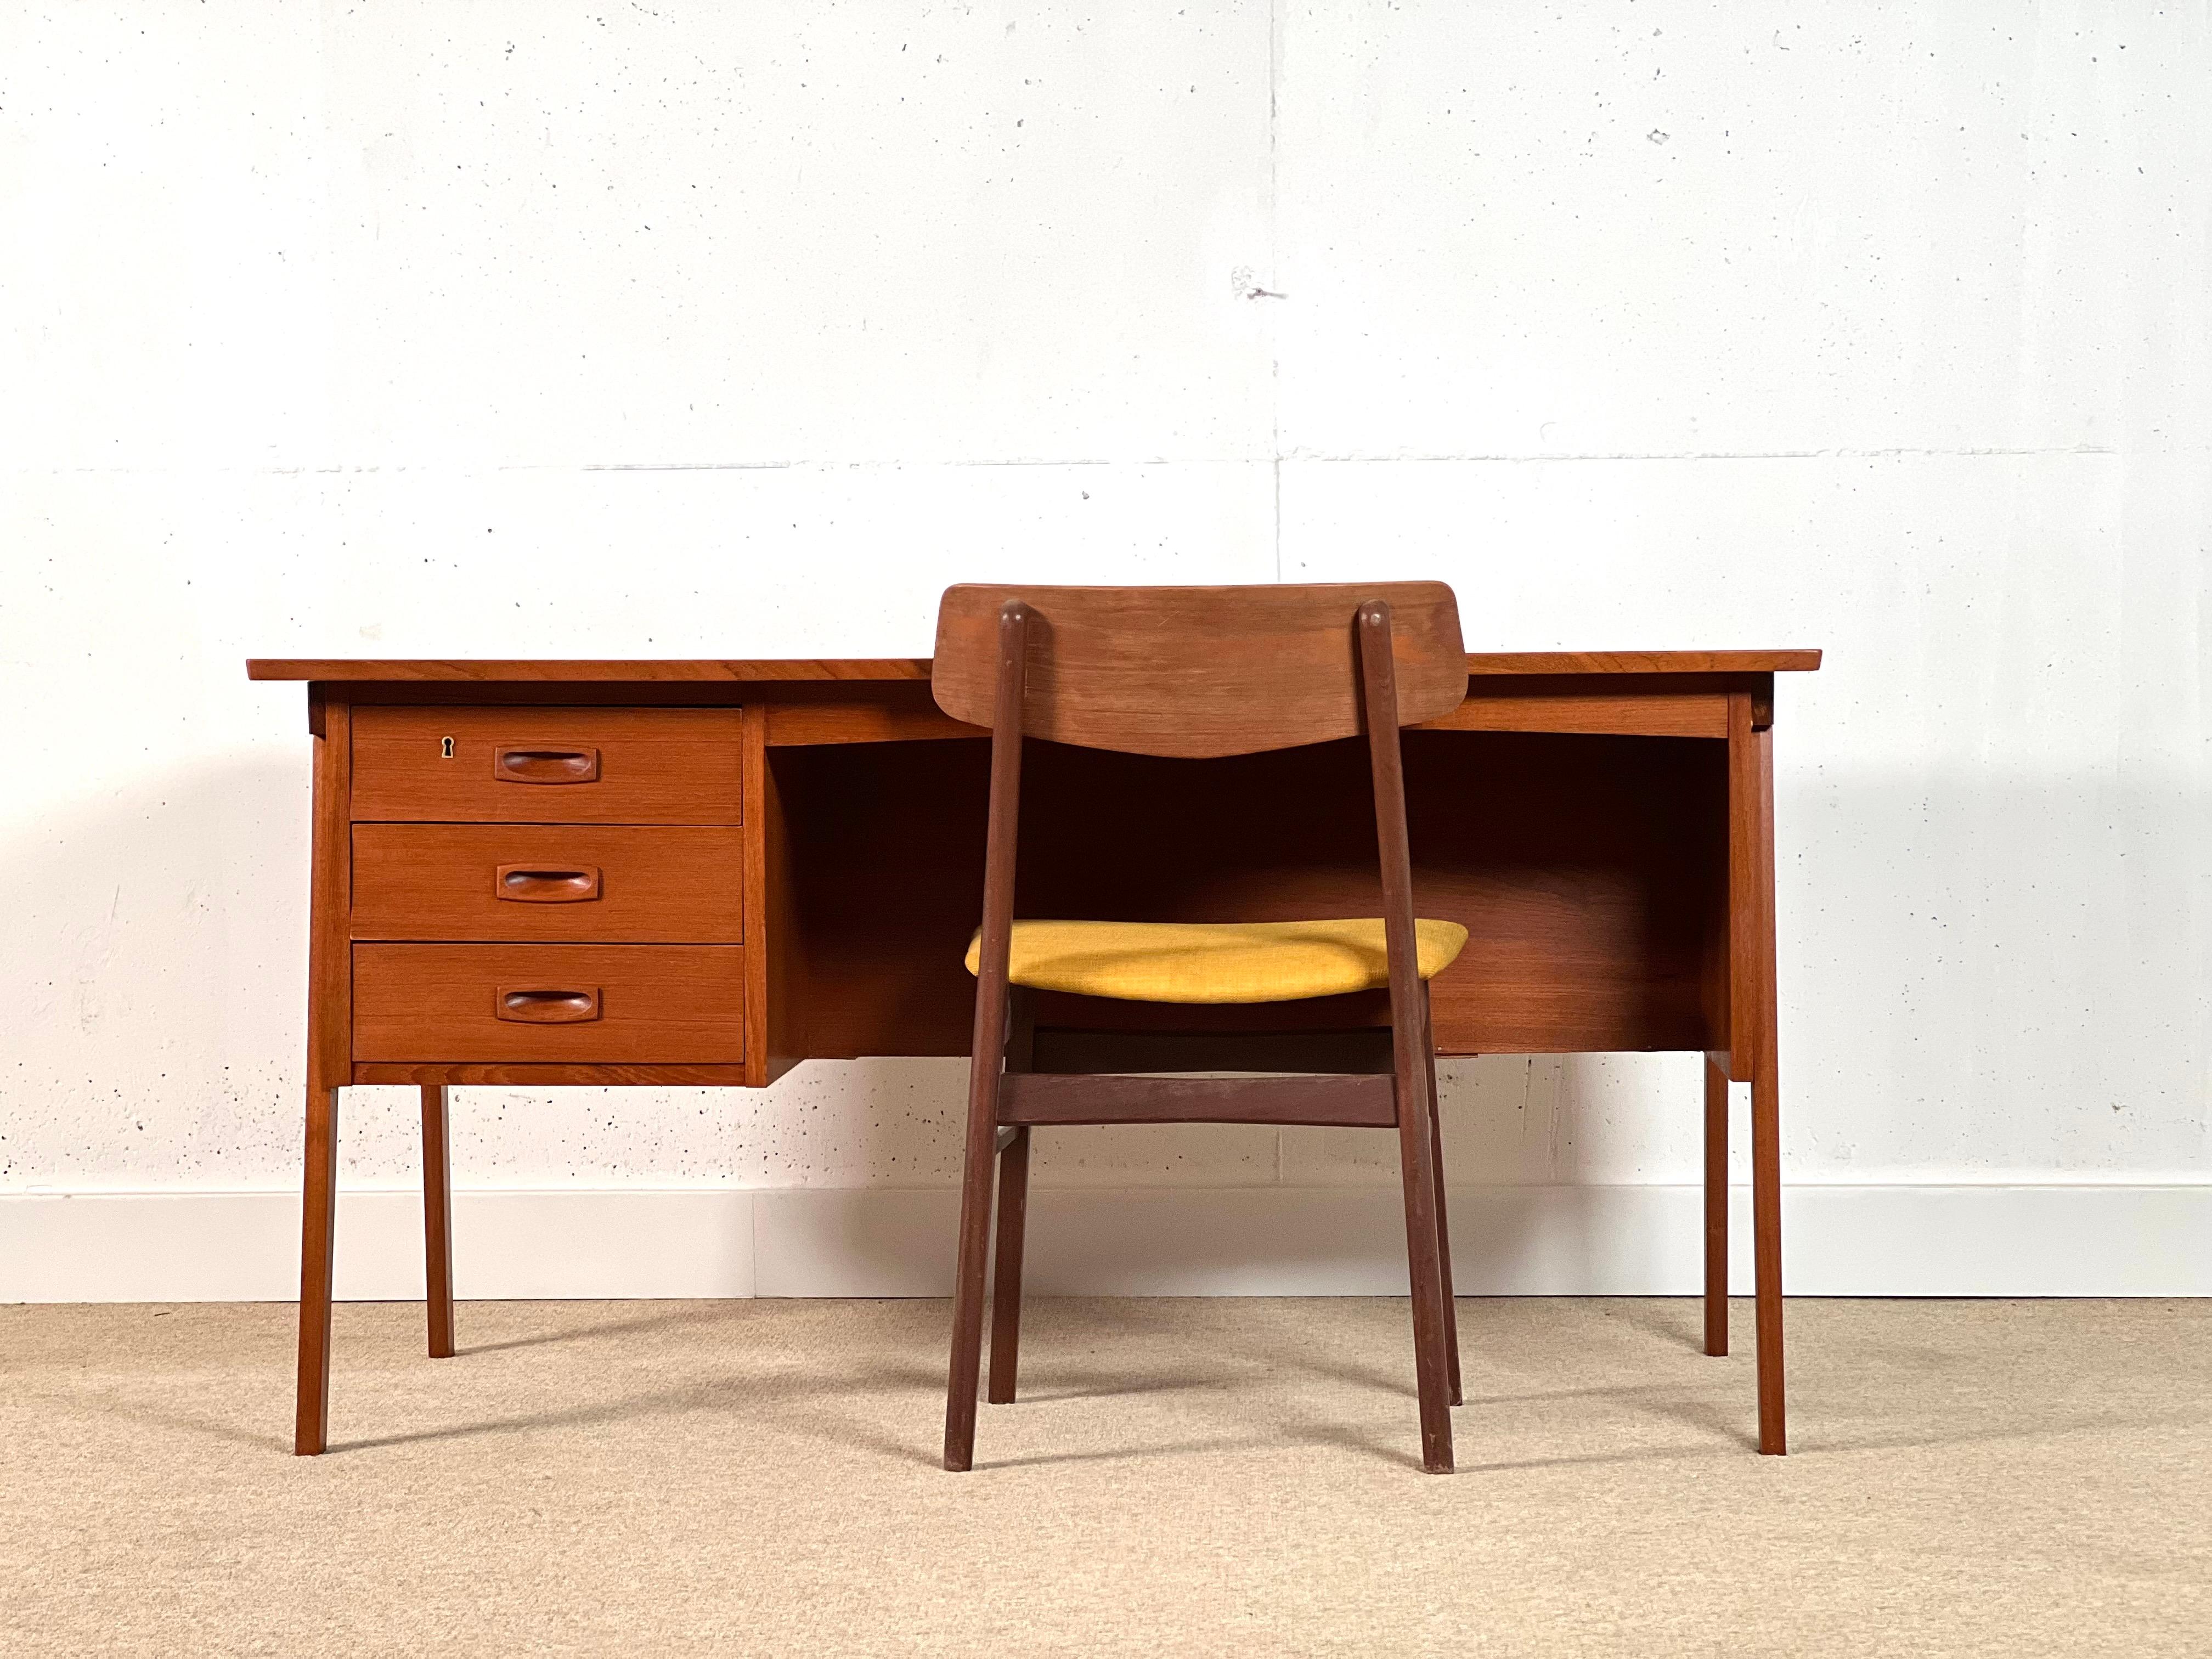 This desk was carefully handcarafted by the high-end Danish cabinet markers.

The bank of drawers on its right hand side, a bookcase in one og the long end and plenty of space for the legs makes this desk very confortable and a beauty piece for